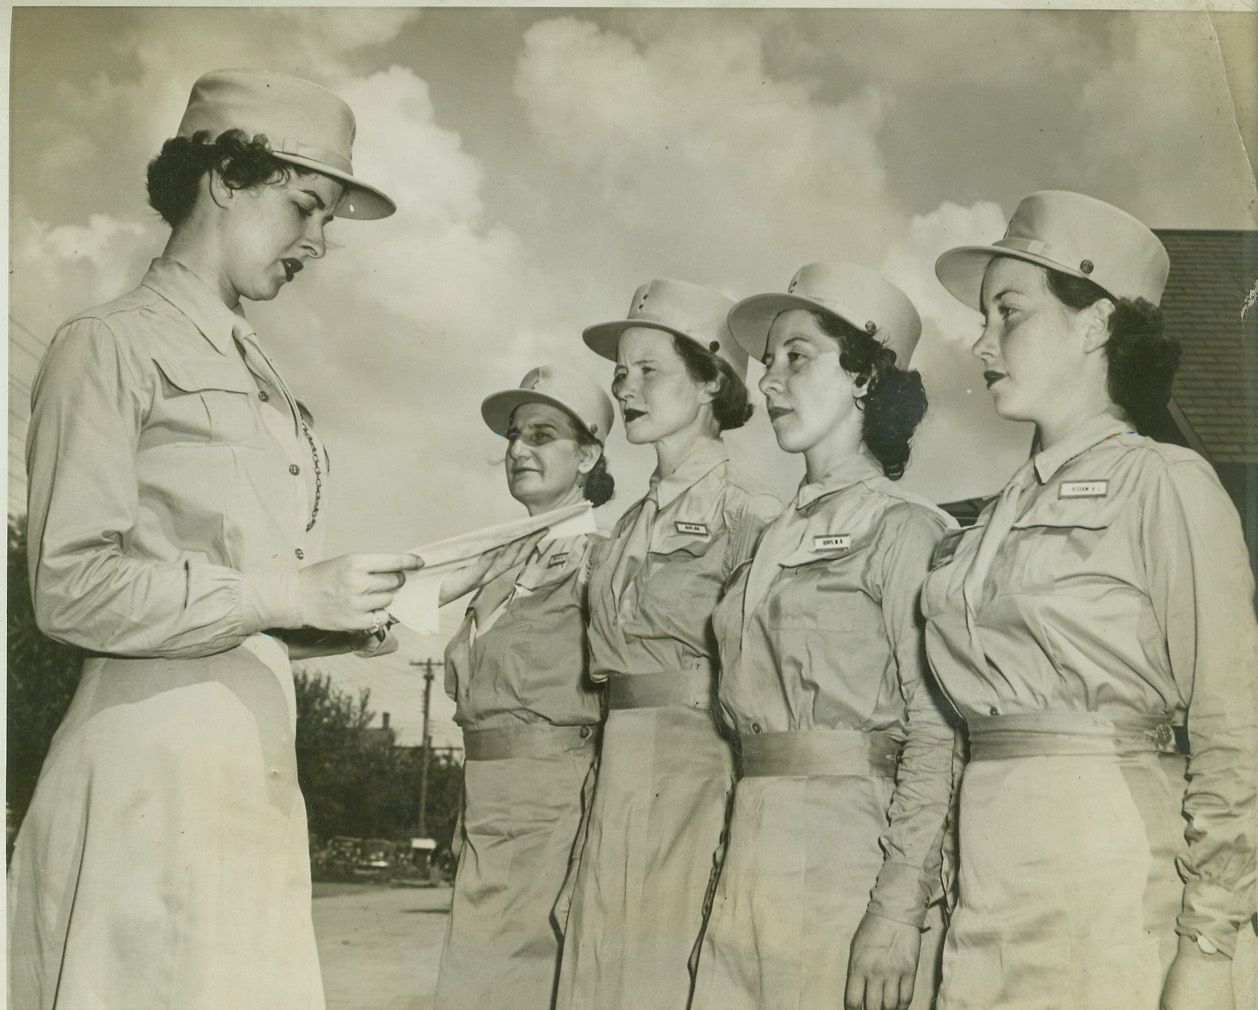 WAAC HAS SERGEANTS TOO, 8/30/1942. FT. DES MOINES, IA. —Sgt. Wilma Stanton, Los Angeles, CA., first WAAC auxiliary (private) to be promoted to grade of Sergeant reads orders to members of her squad. Left to right: Helen Delvoski, Philadelphia, PA, Opal Aliff, Huntington, W. VA, Winifred Cioffi, Rutand, VT., Helen Hickman, Atlanta, GA. Credit: OWI Radiophoto from ACME;